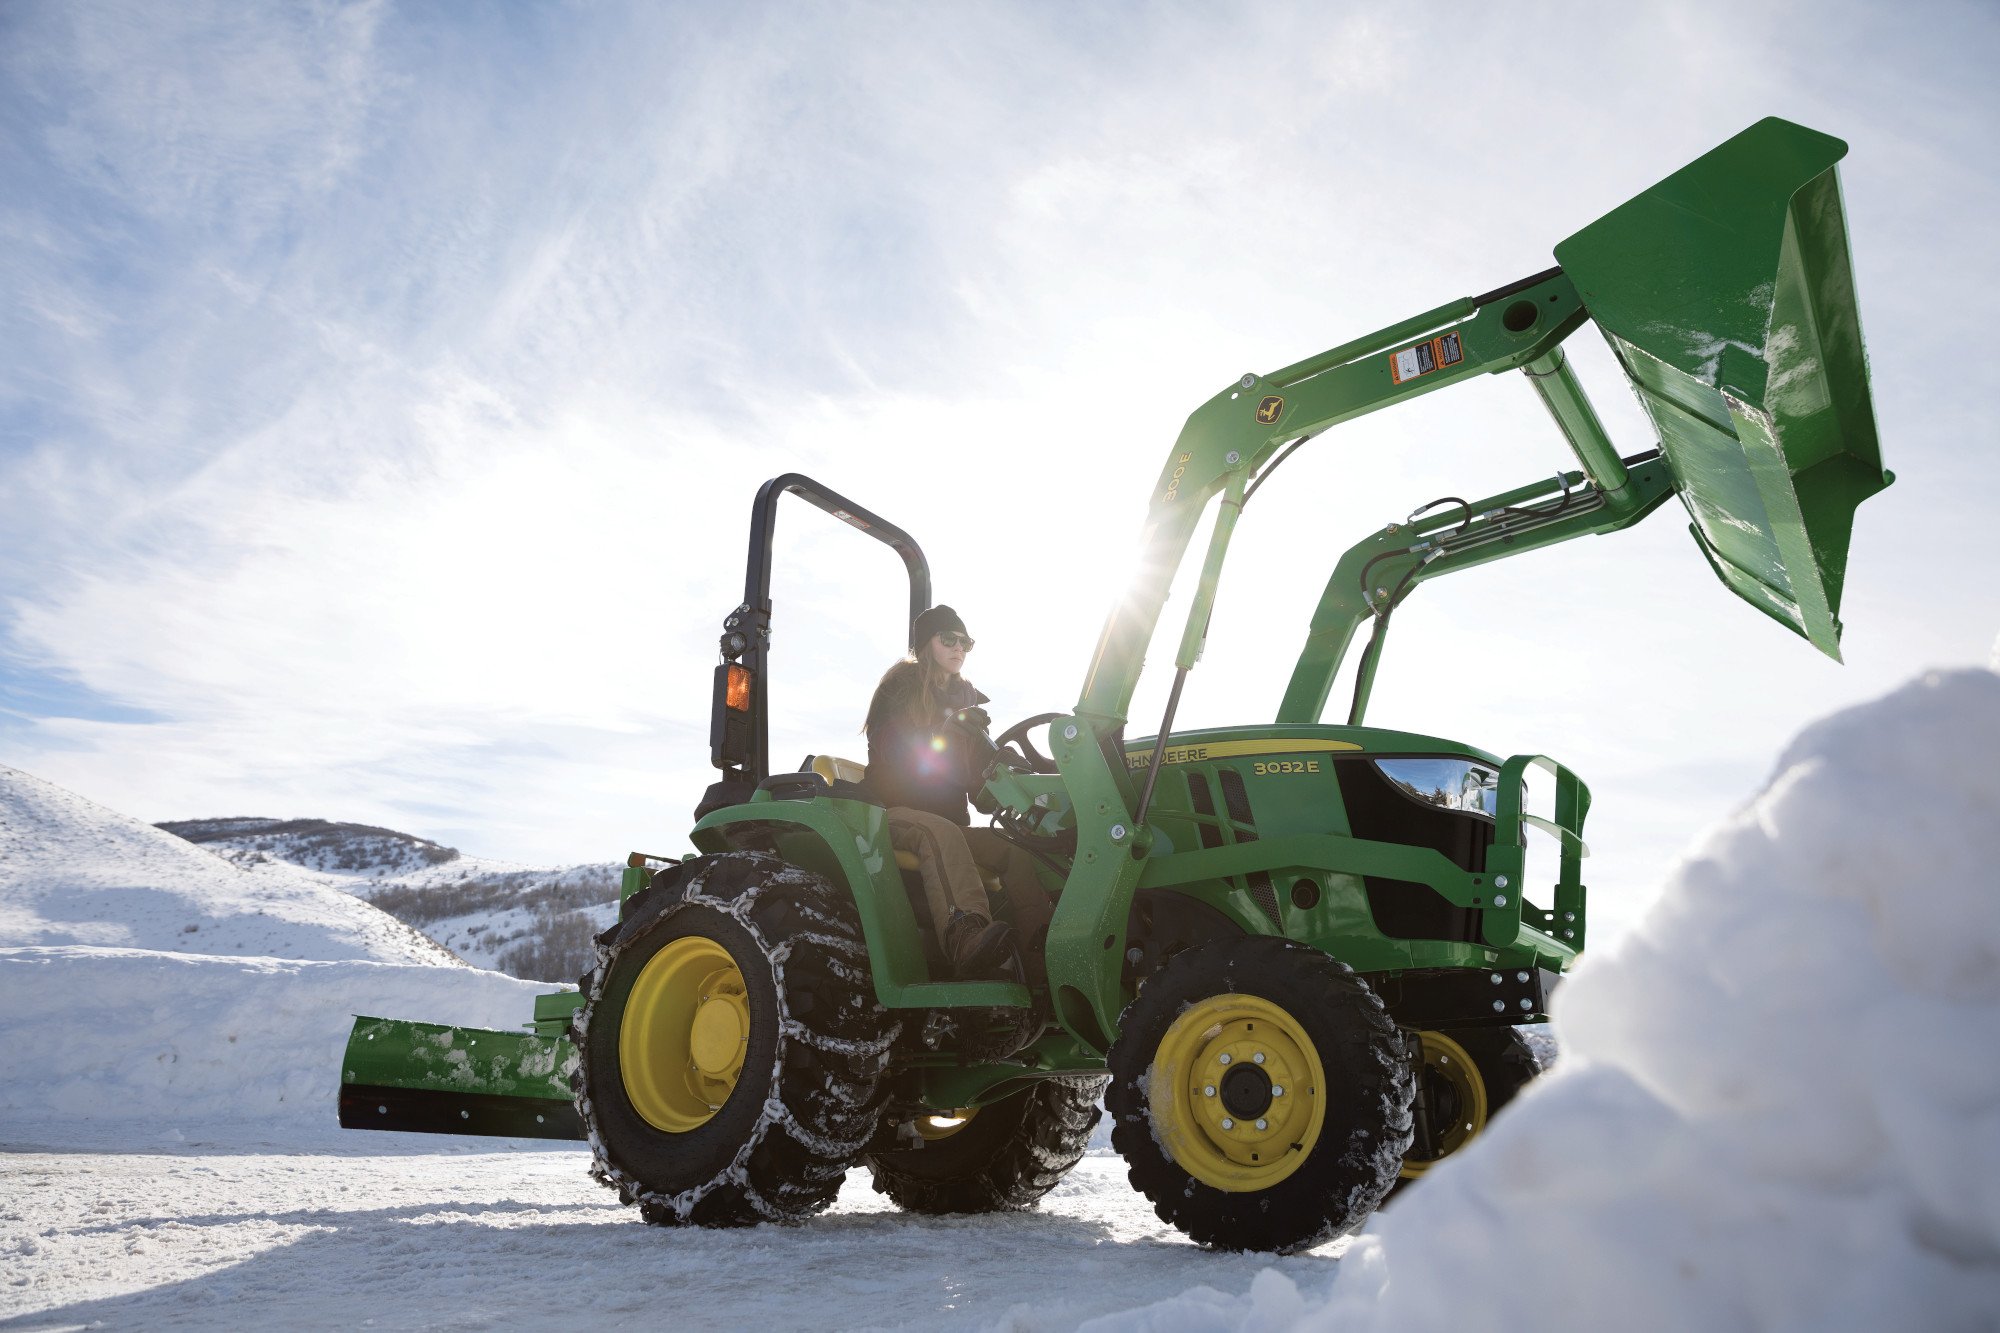 John Deere 3E Compact Tractor moving snow with loader